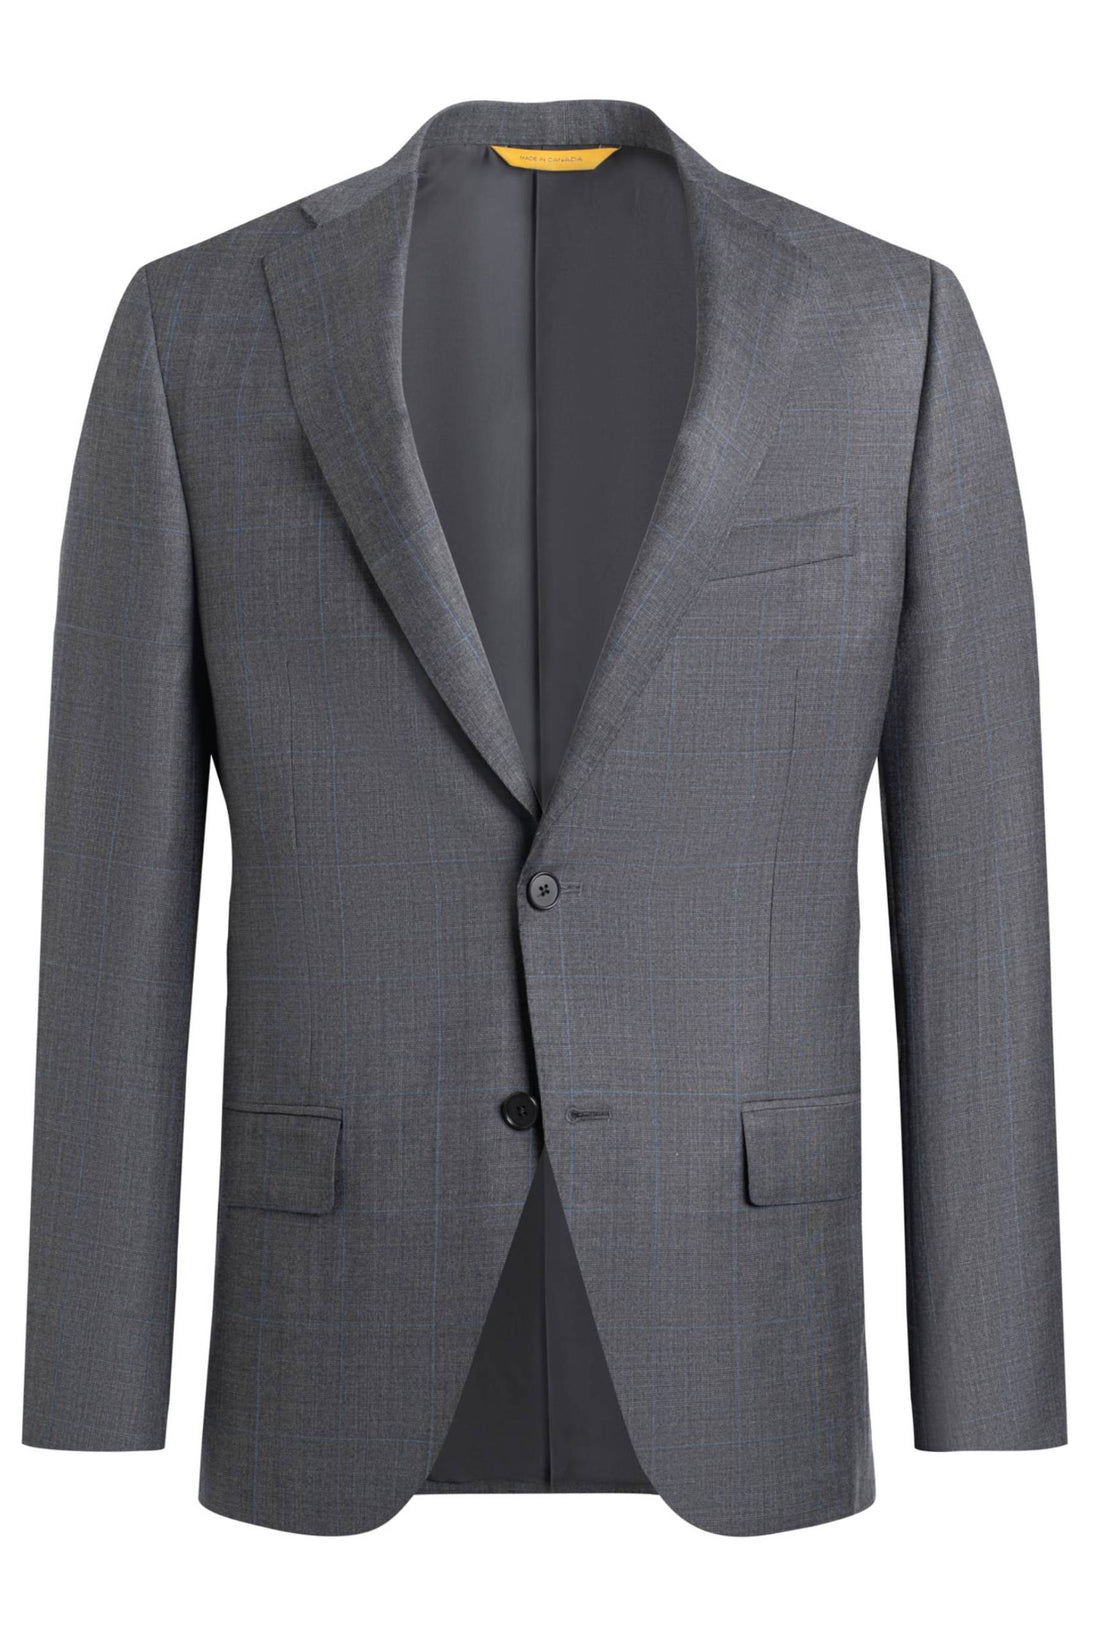 Heritage Gold Grey 130'S Plaid with Blue Overcheck Suit Front Jacket